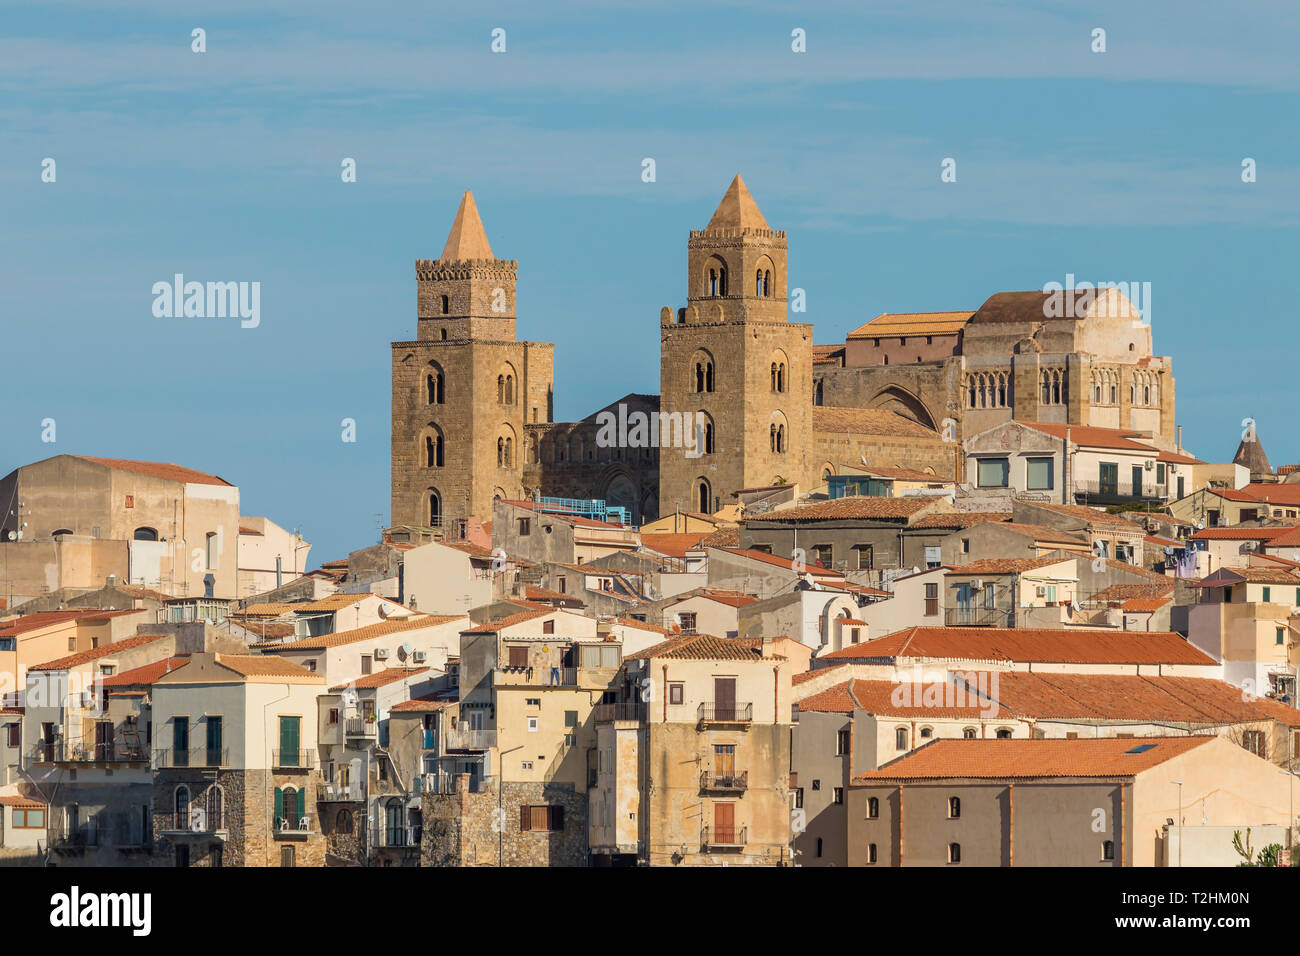 The cathedral of Cefalu above the old town, Cefalu, Sicily, Italy, Europe Stock Photo